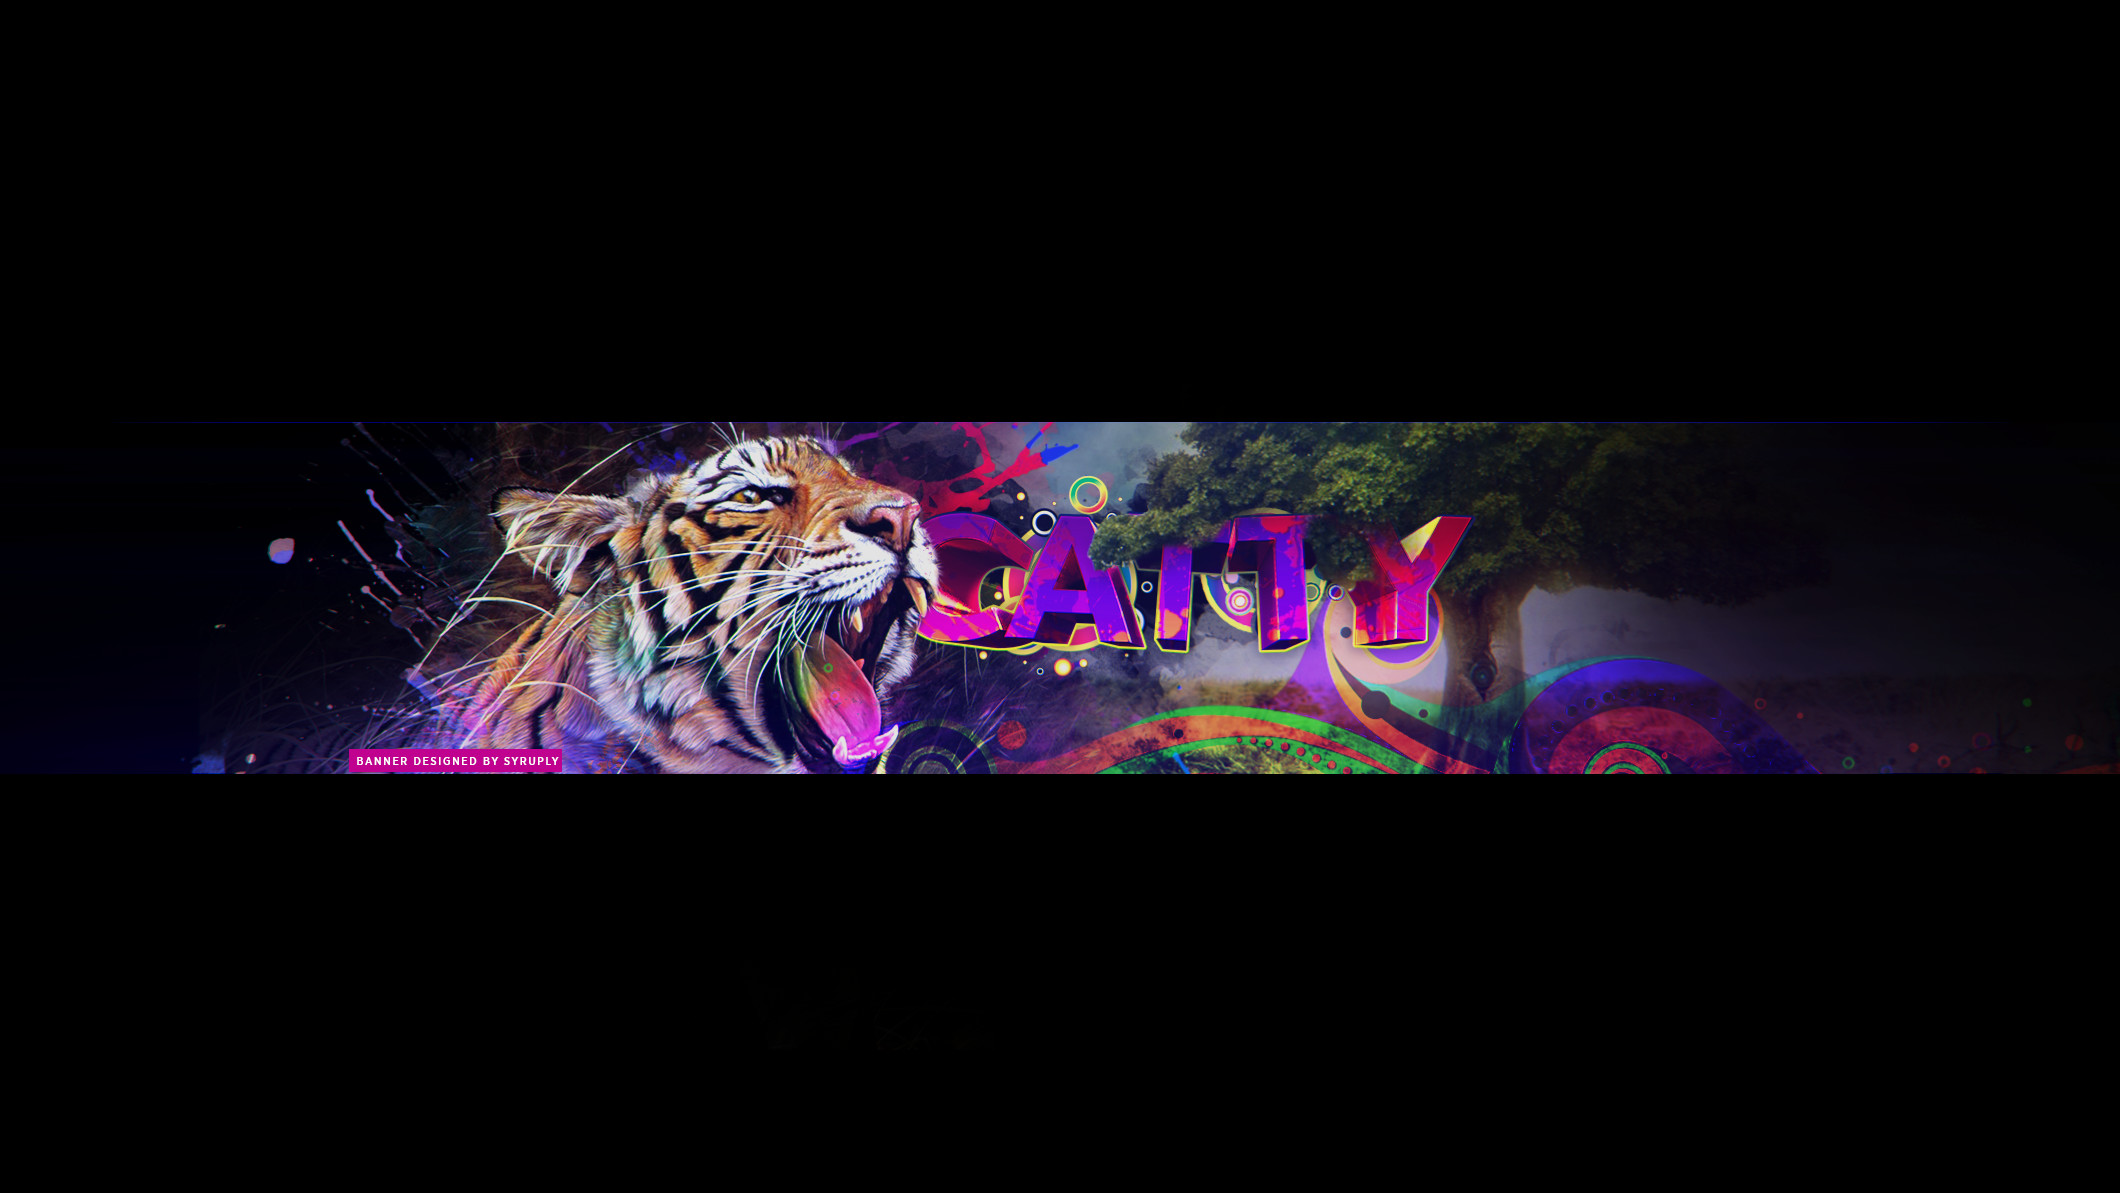 2120x1193 catty youtube banner client by syruply on deviantart .